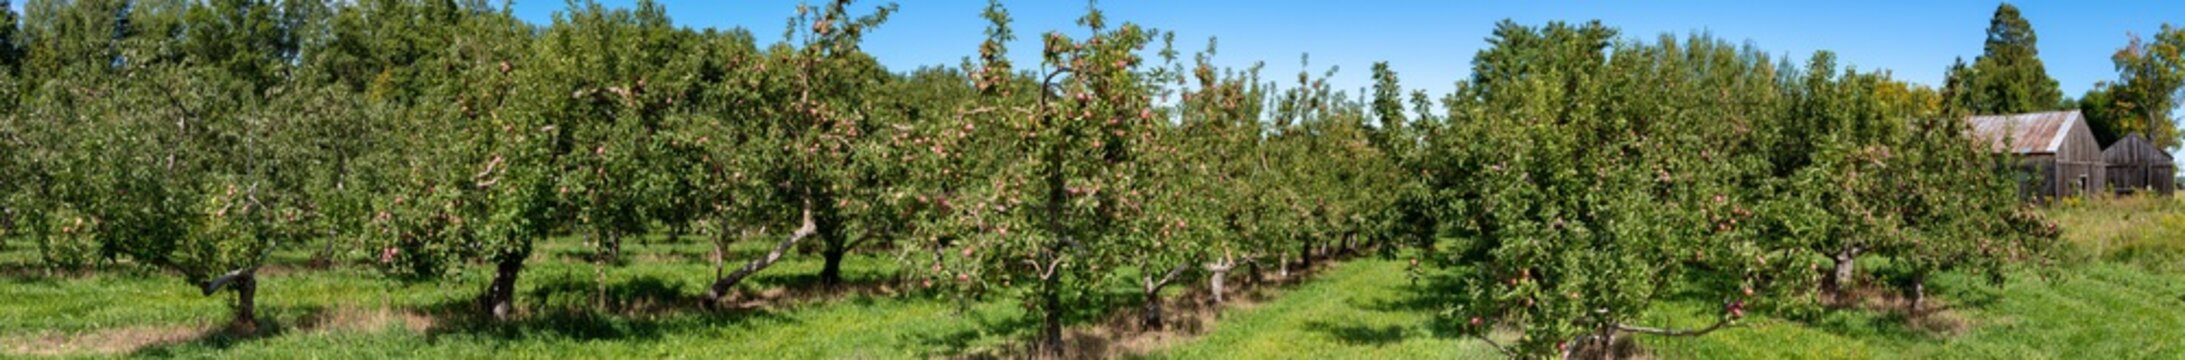 Panoramic view of apple trees just before picking apples